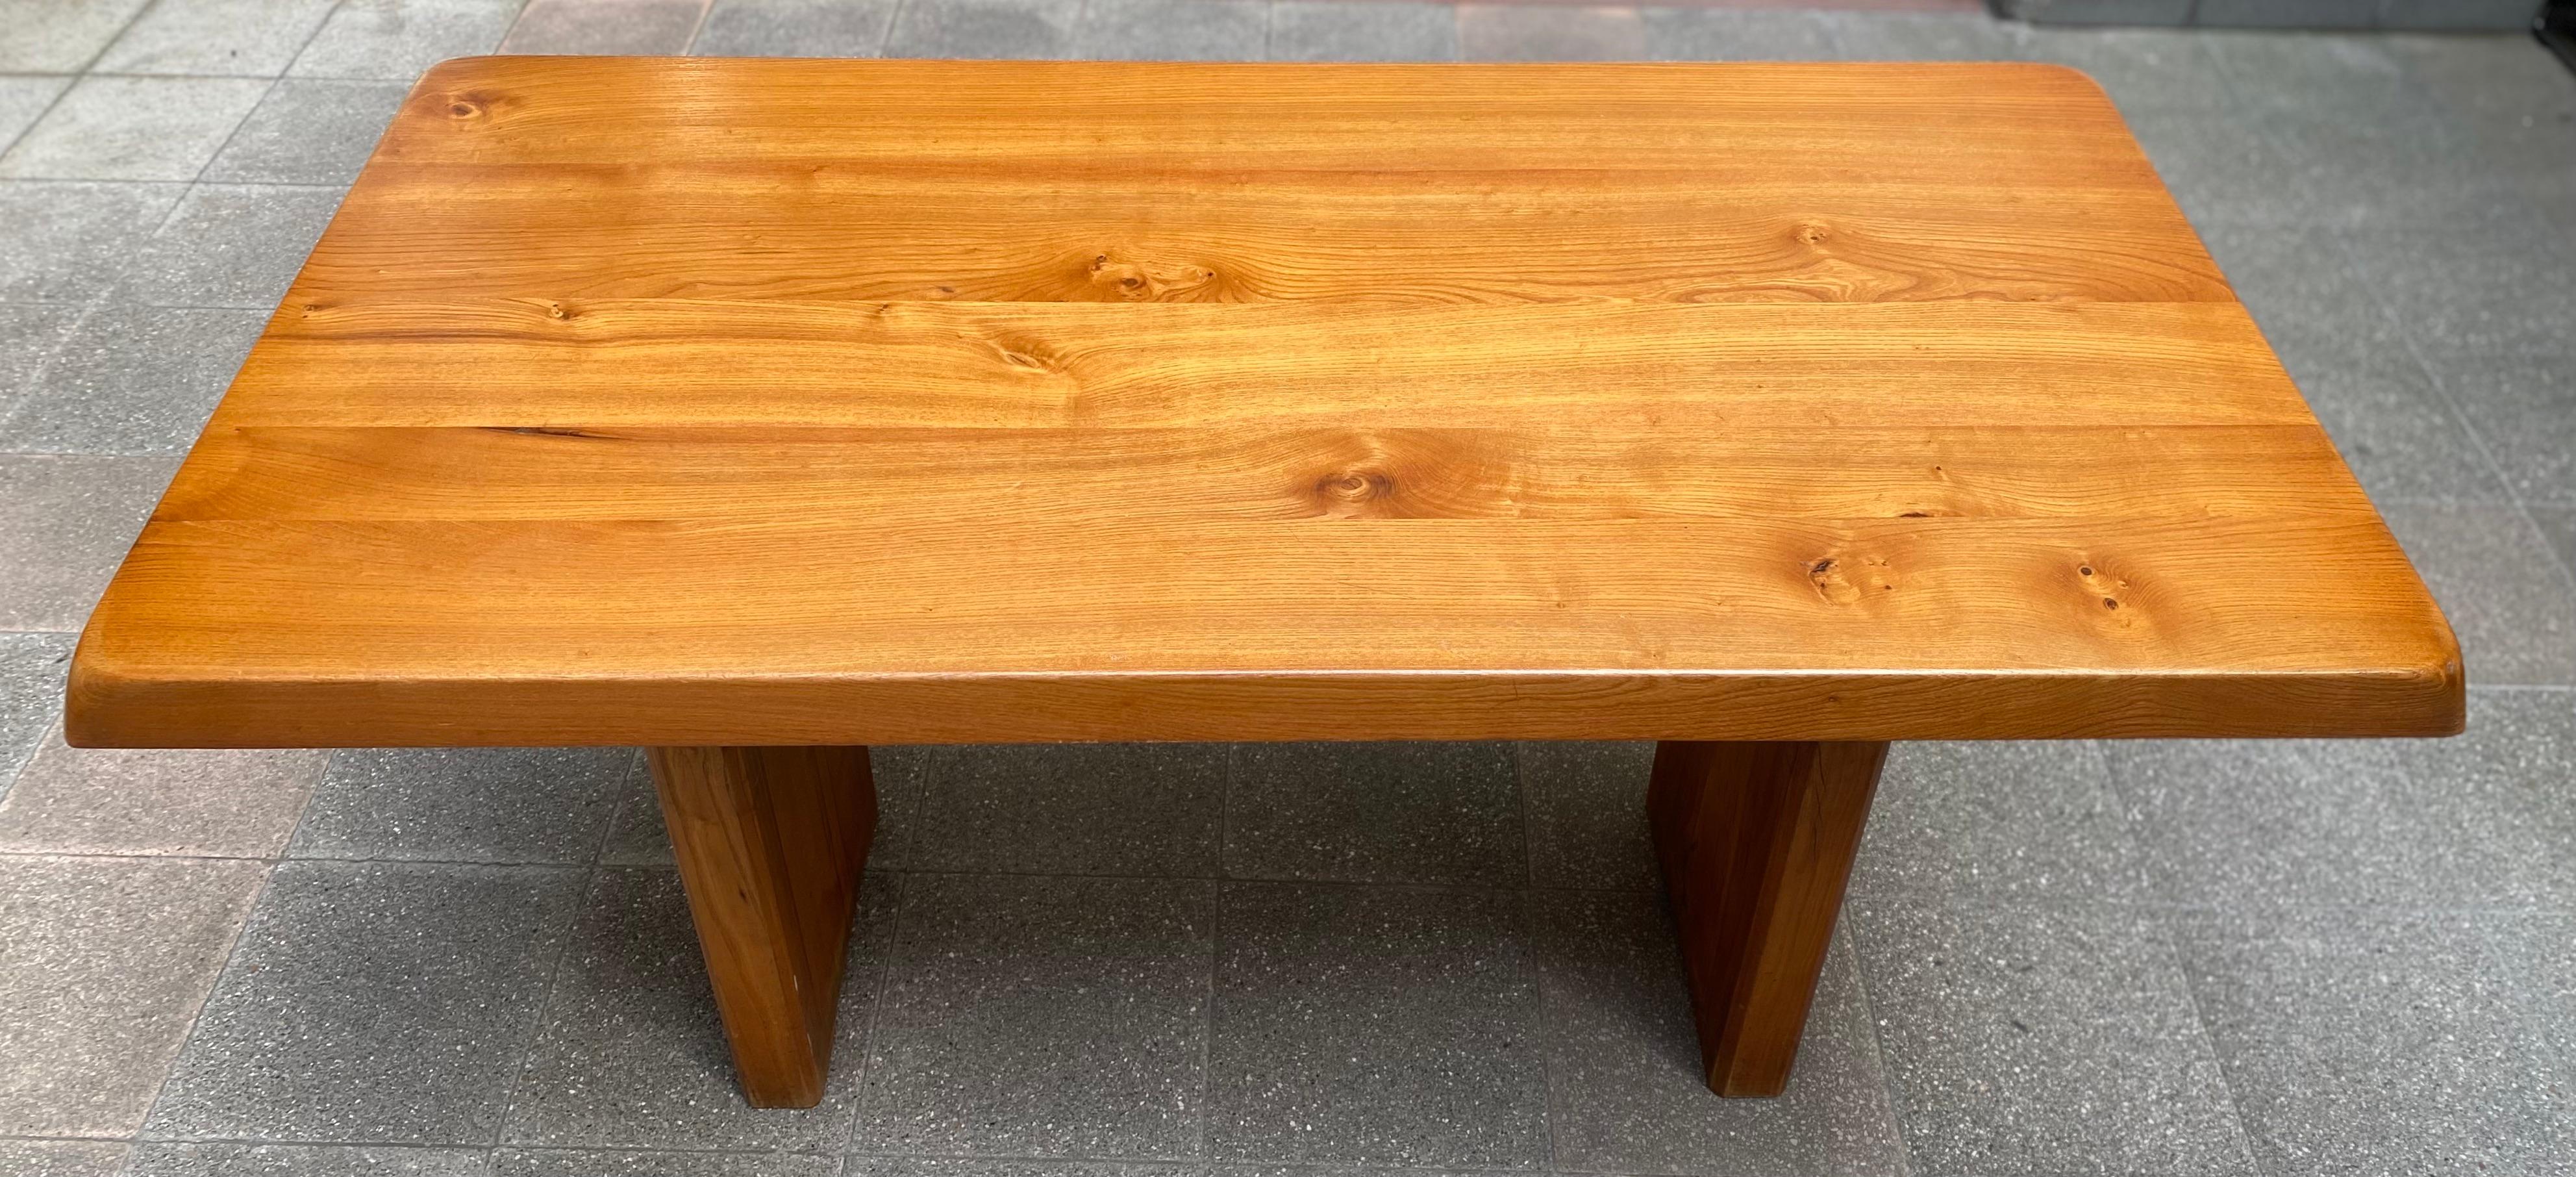 Superb Table T14 by Pierre Chapo, circa 1960 For Sale 4